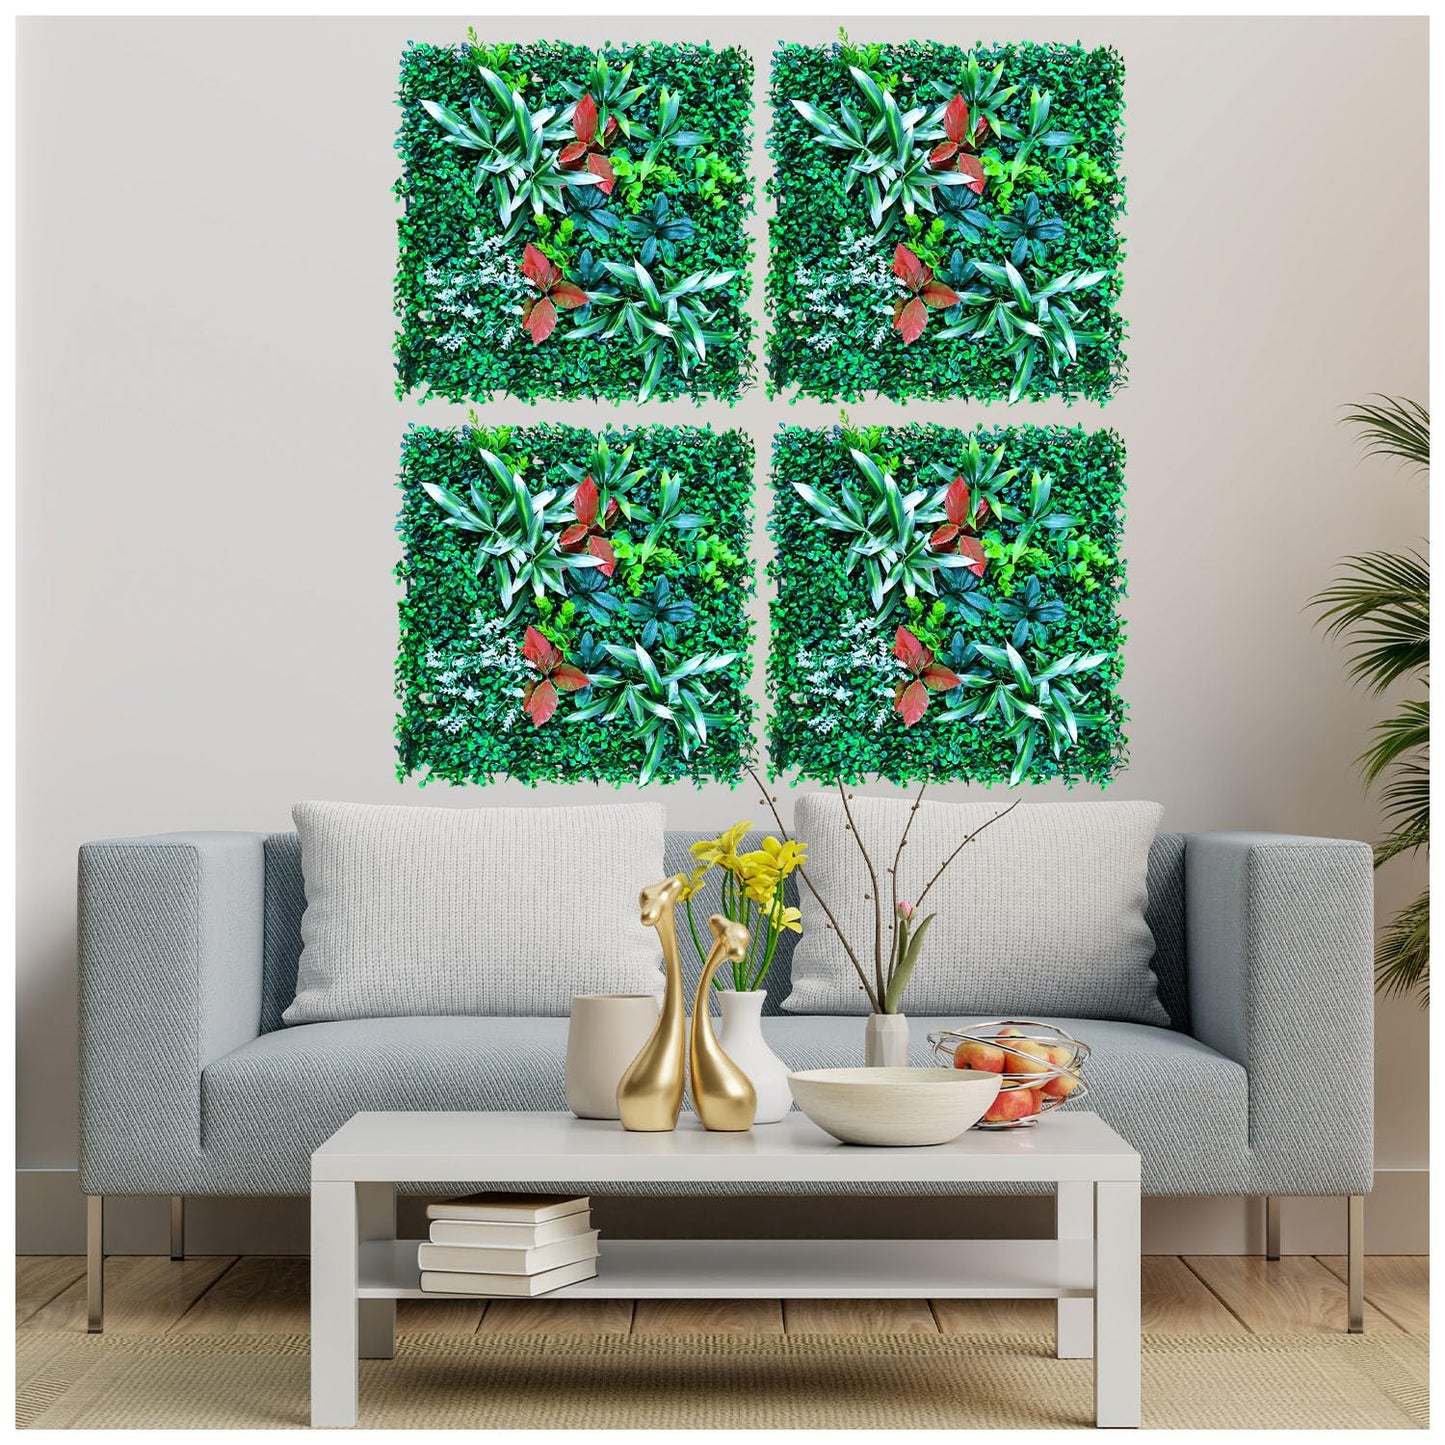 Artificial Vertical Wall Mat for Indoor & Outdoor Walls 50 cm x  50 cm, Green Leaves With Red Flower